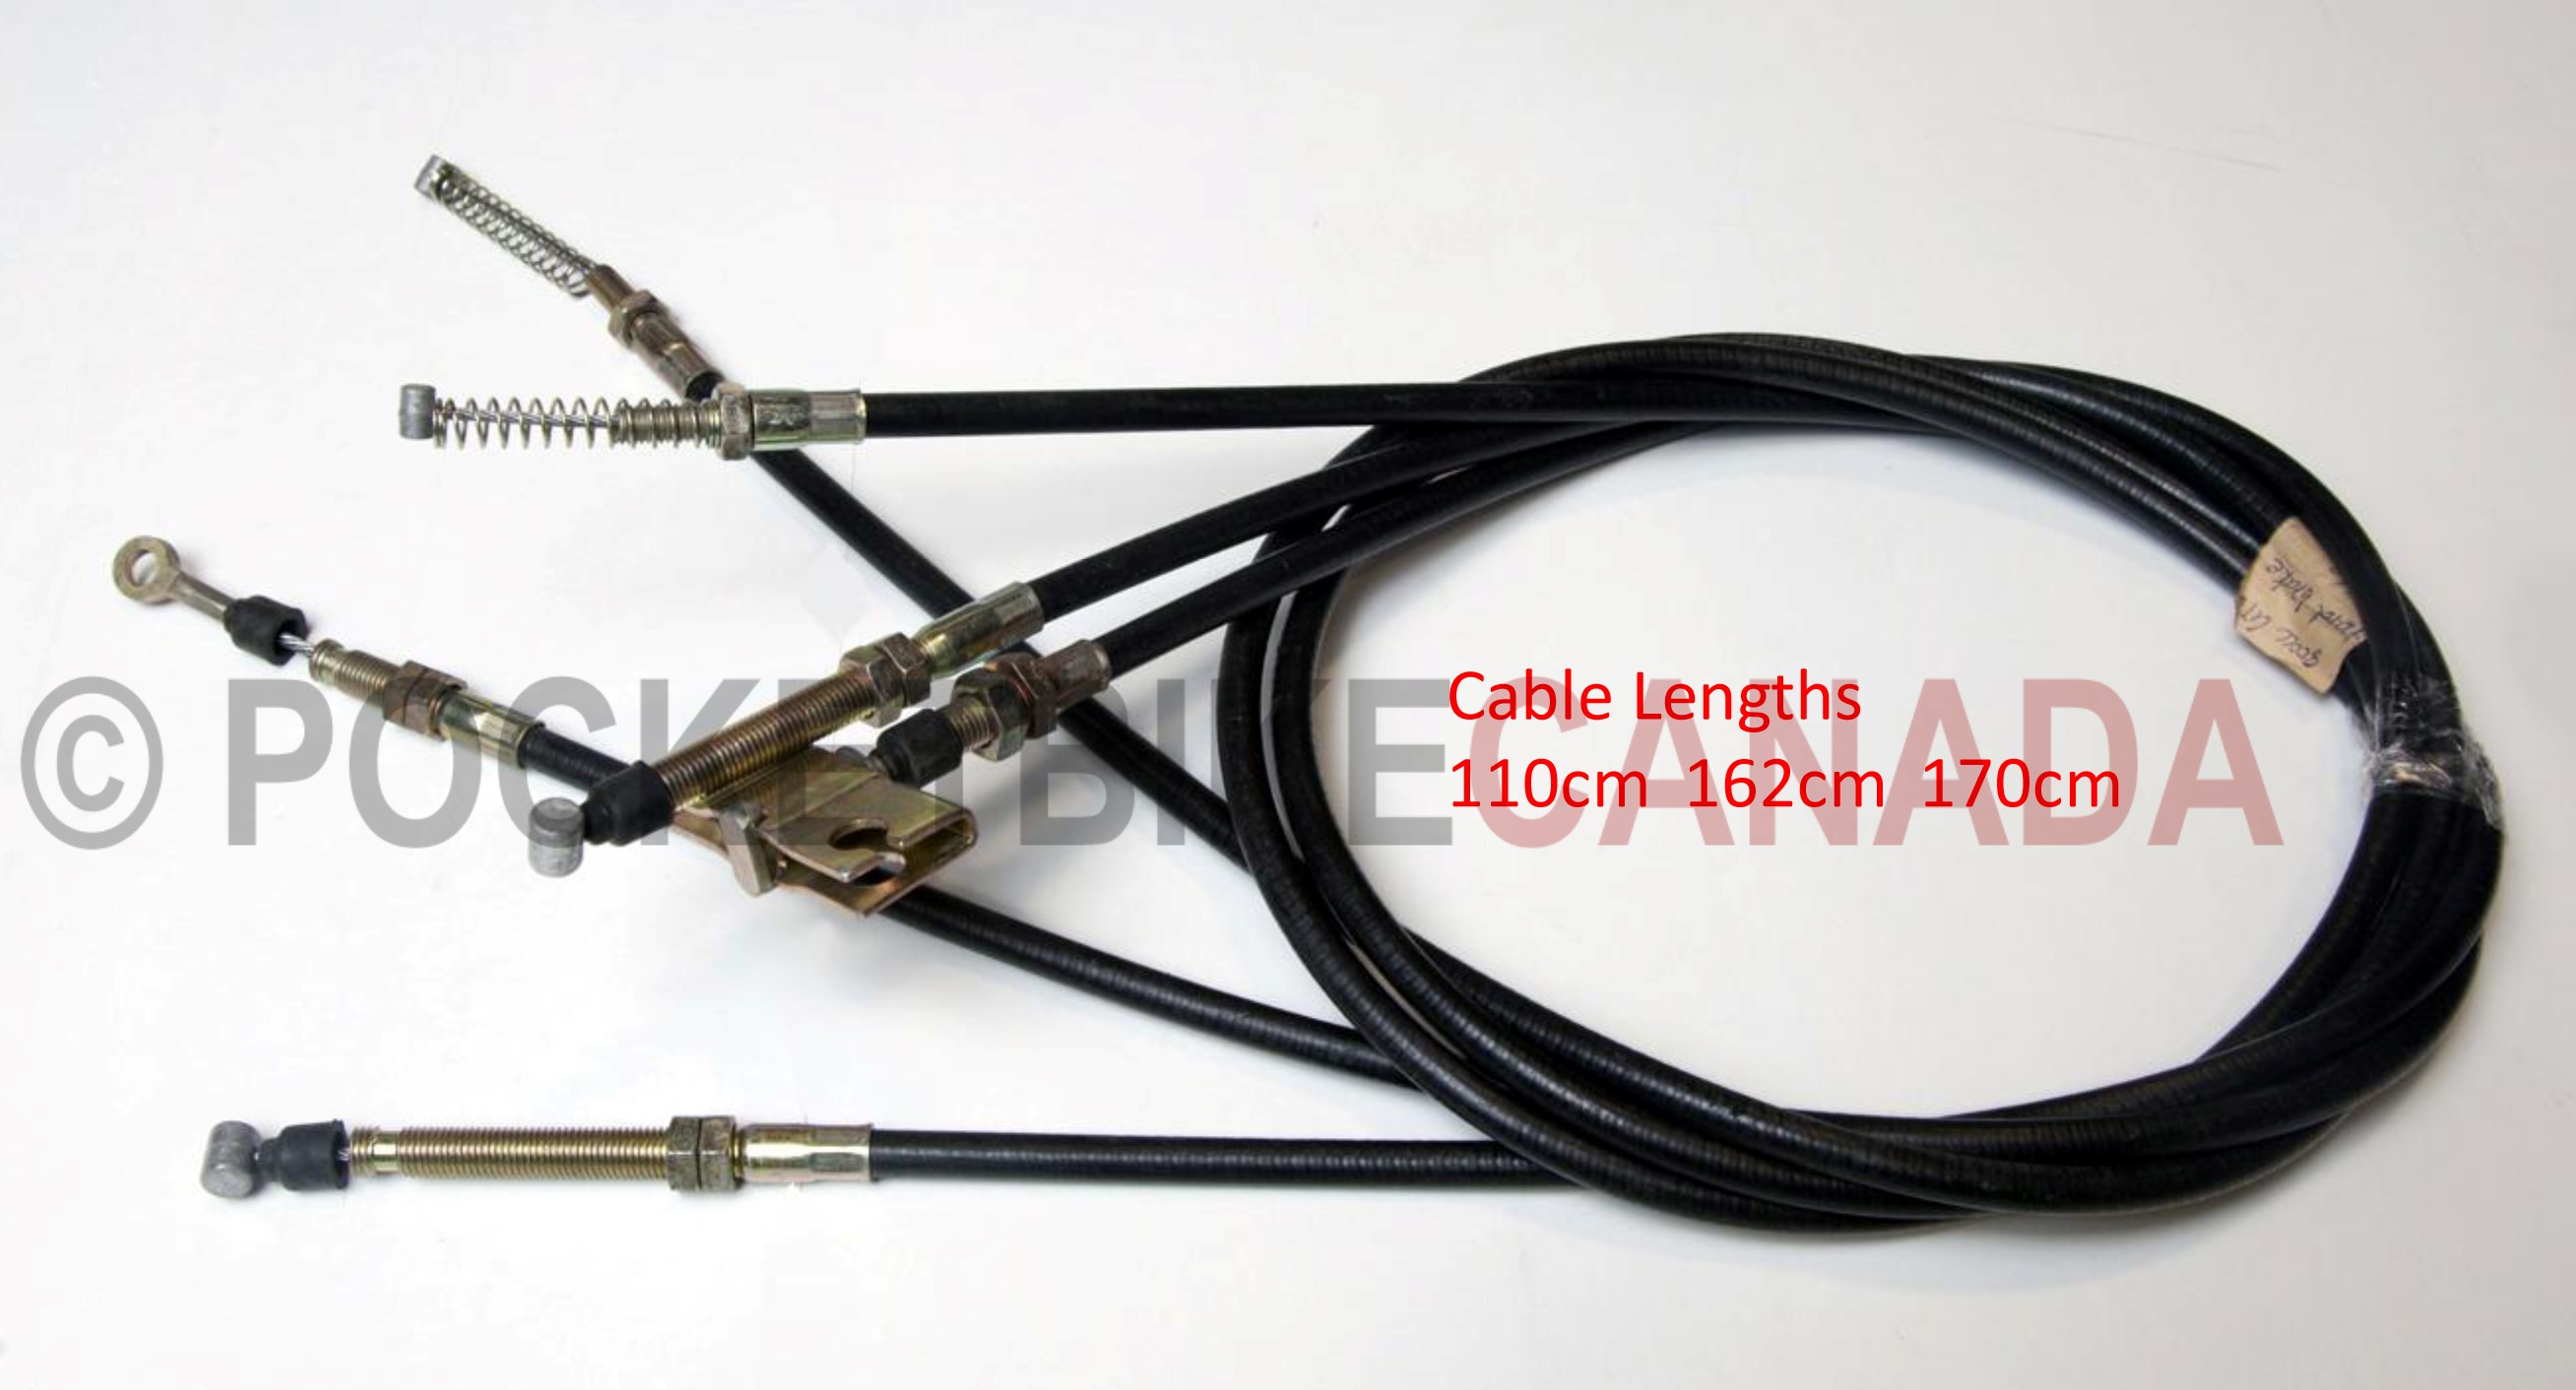 Hand Brake Cable Set for Gio WorkHorse 800cc UTV Side by Side ROV - G8070003